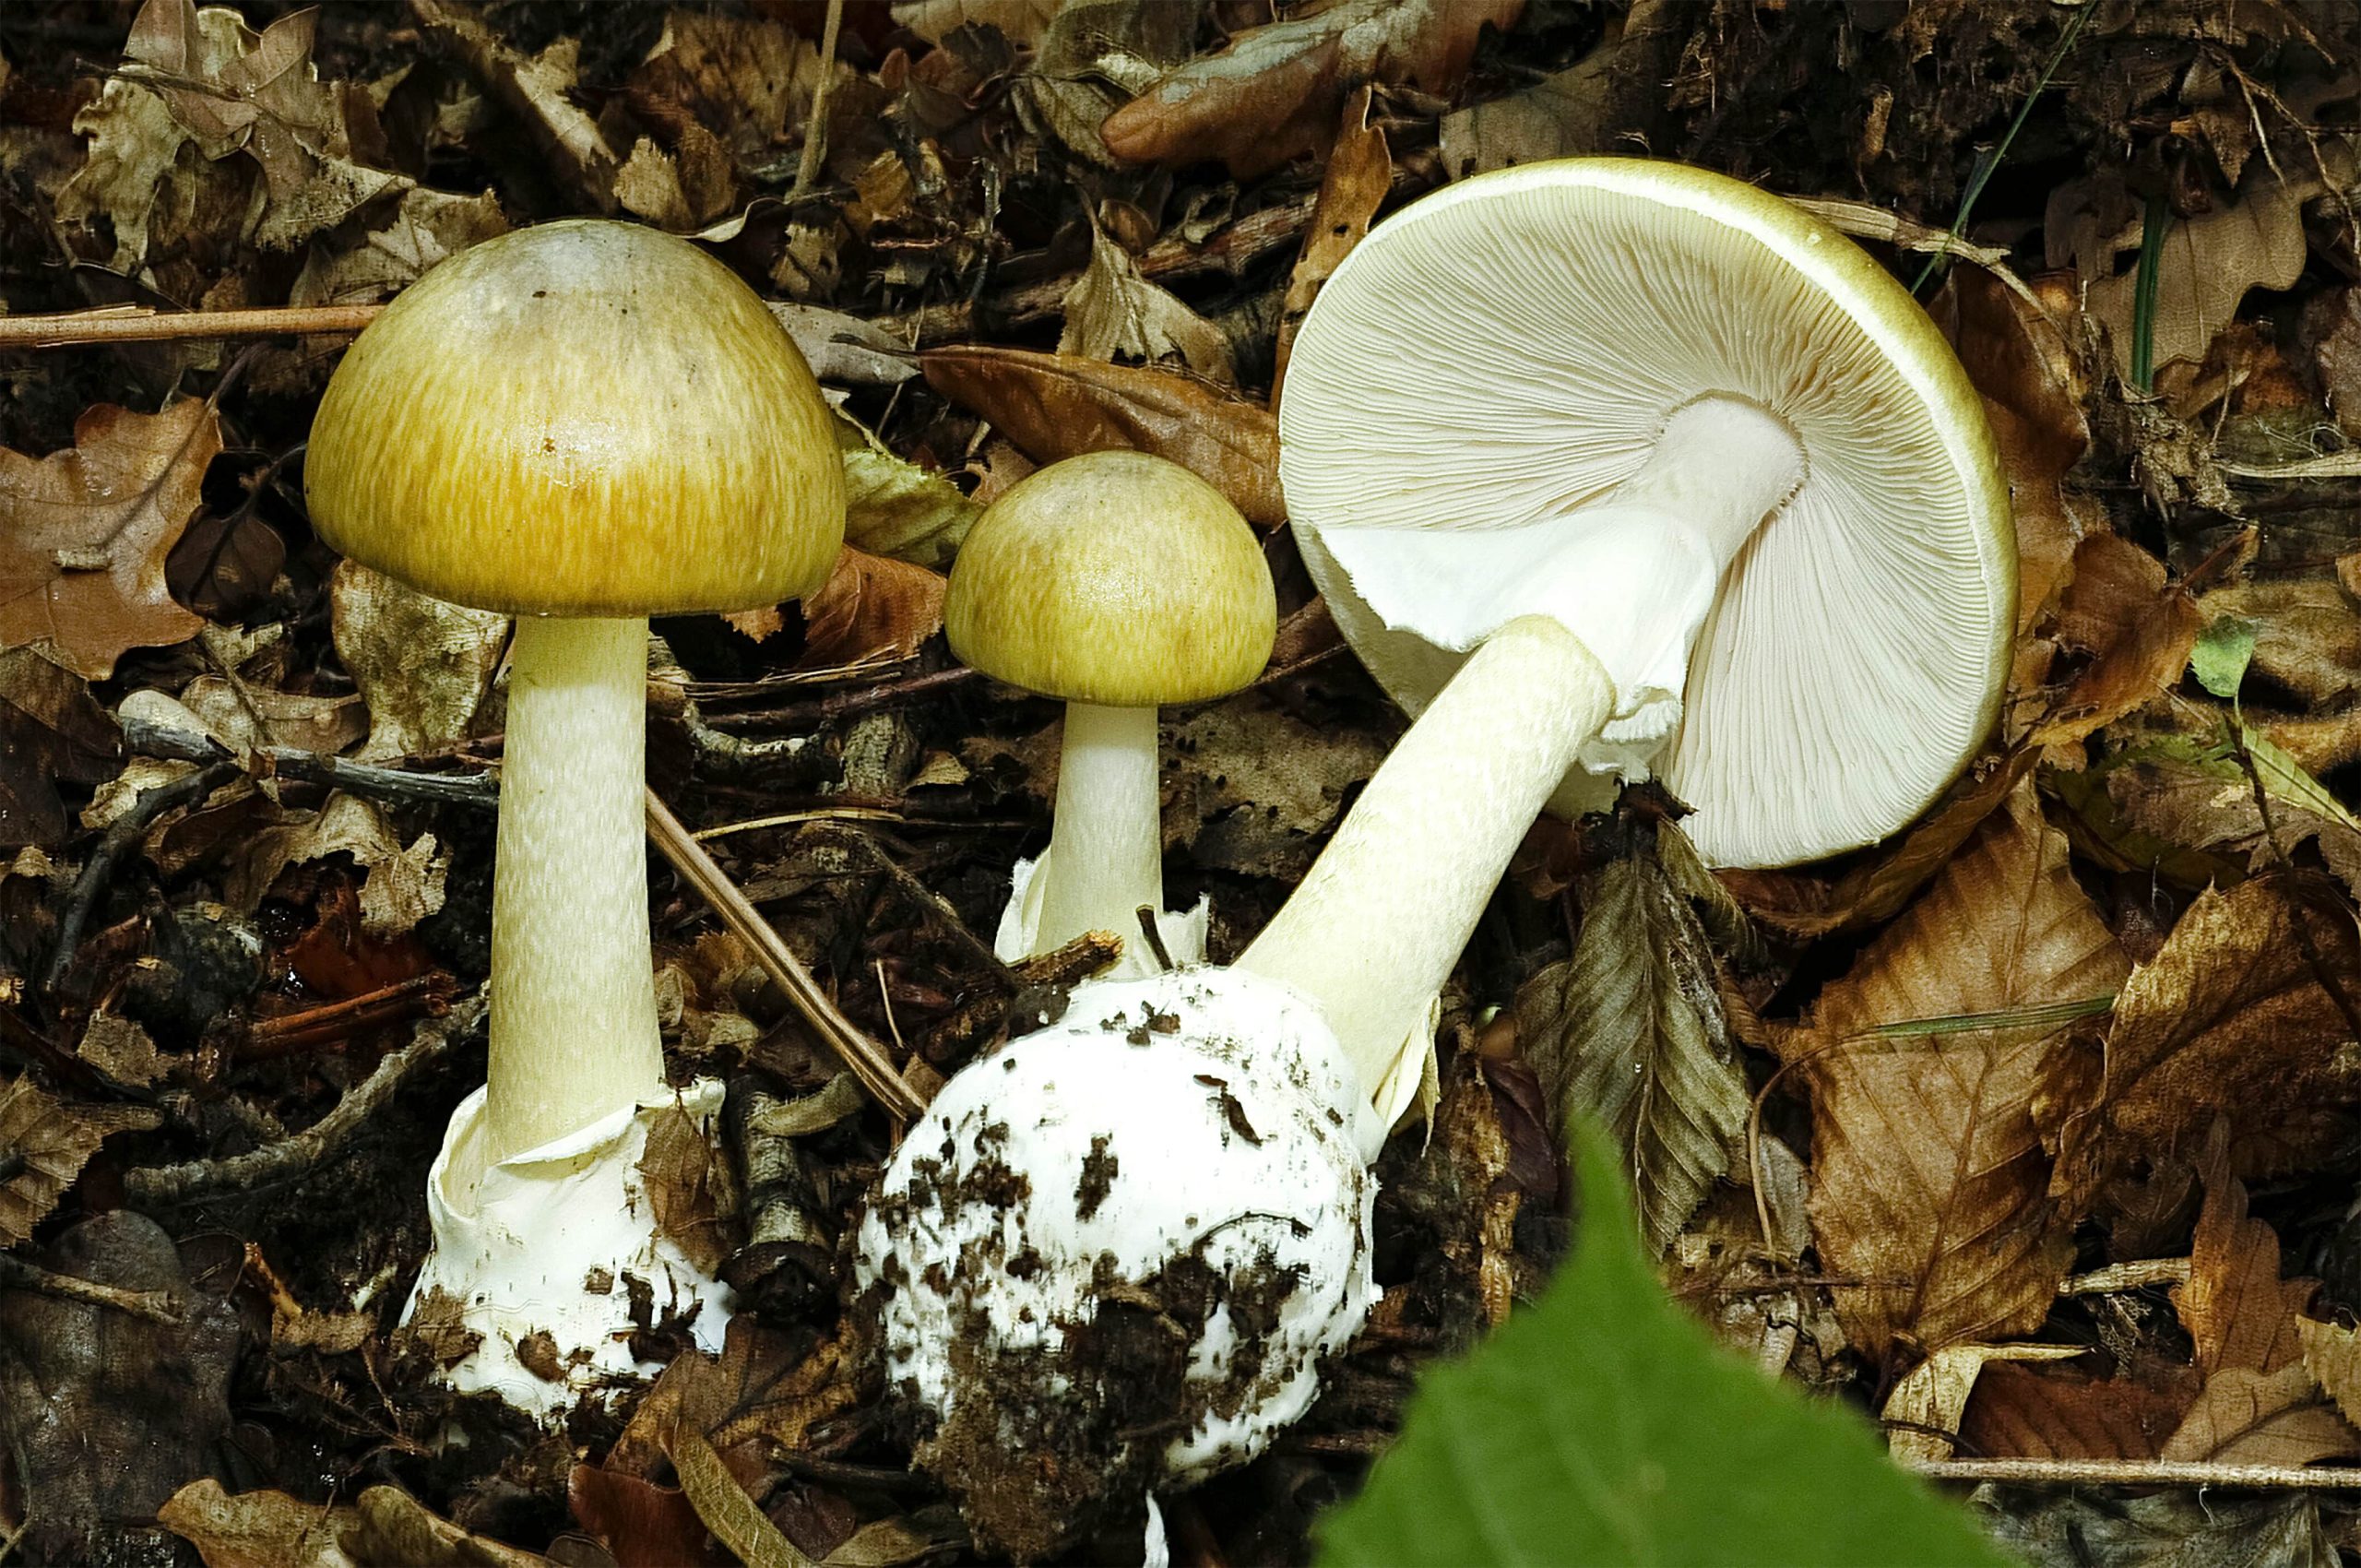 Mother, Son Survive Brush With ‘Death Cap’ Mushrooms Thanks to Experimental New Drug